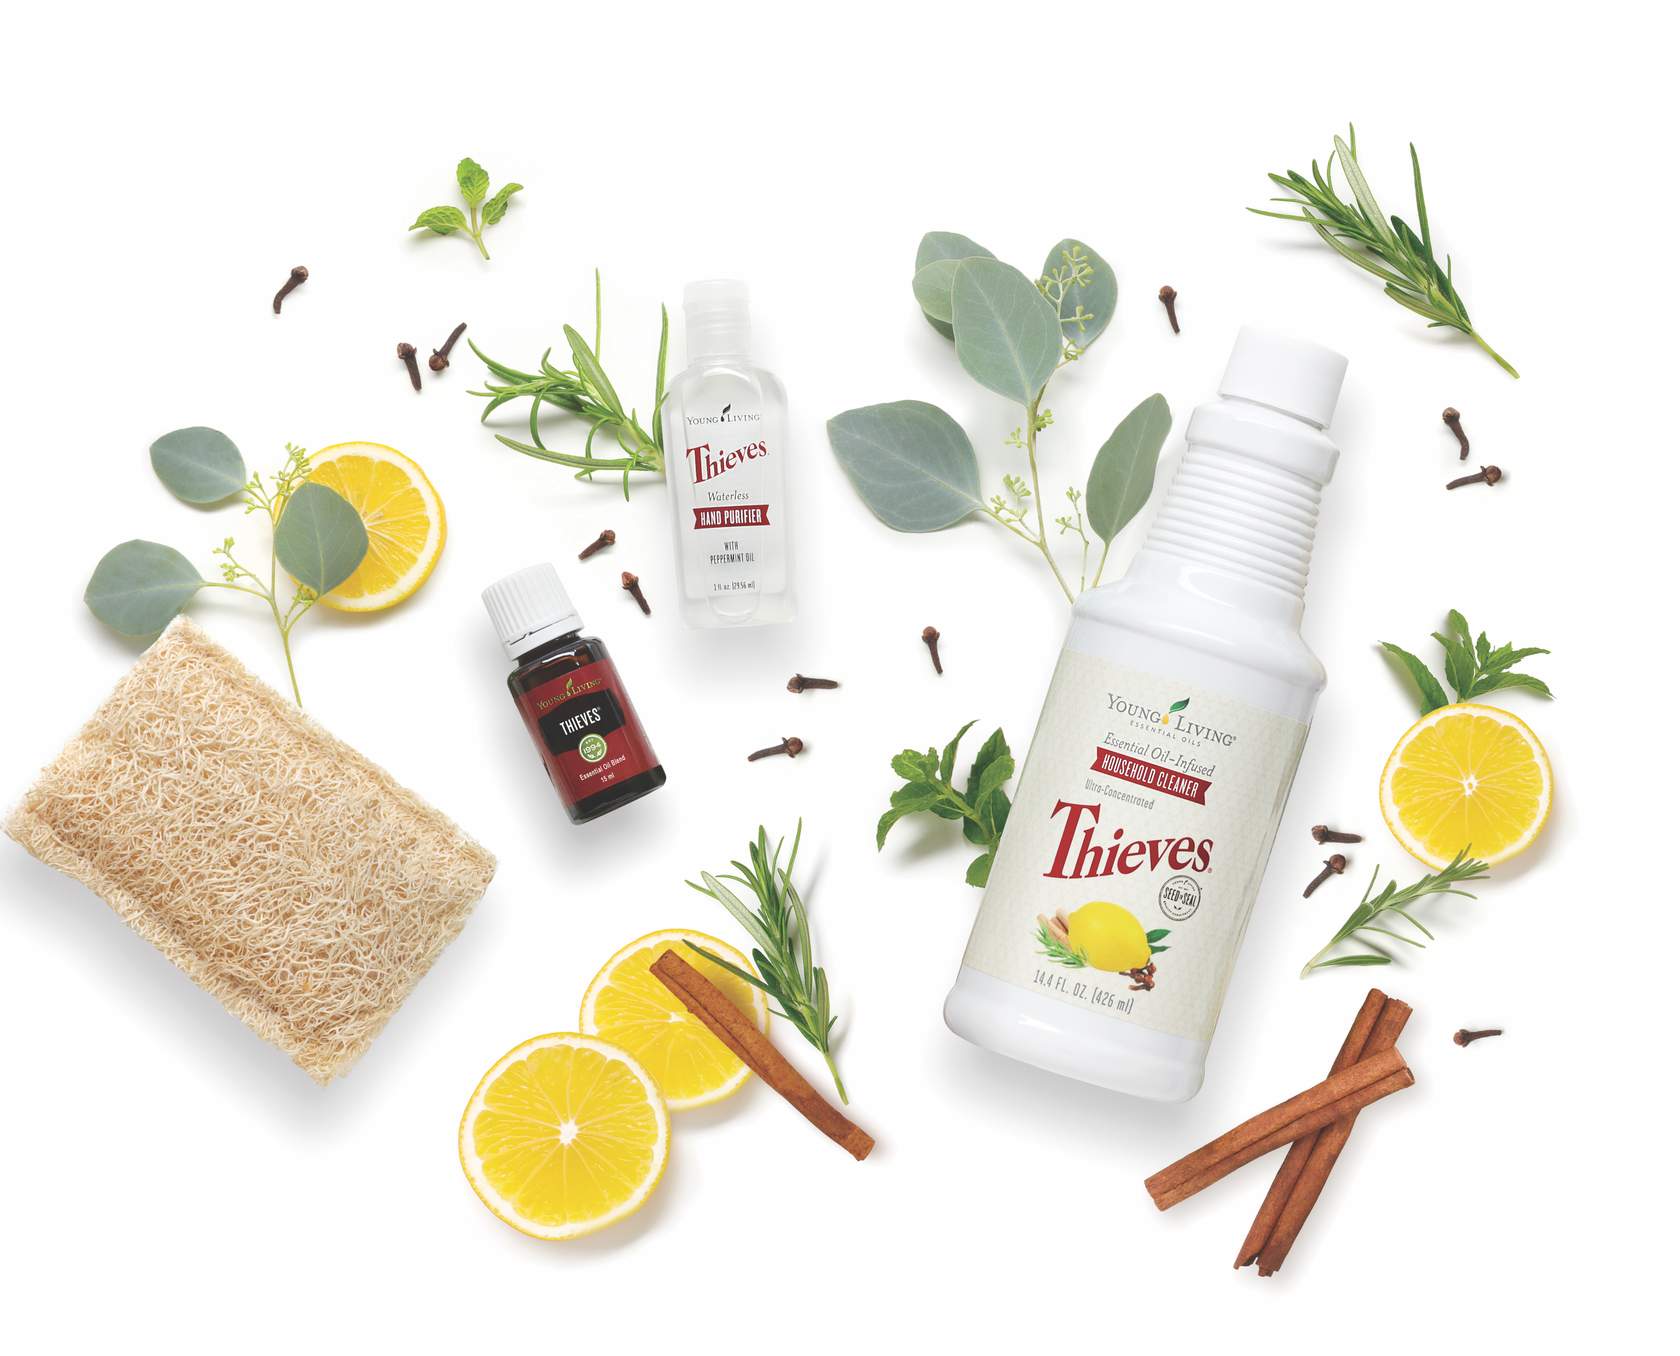 thieves products with lemon and cinnamon